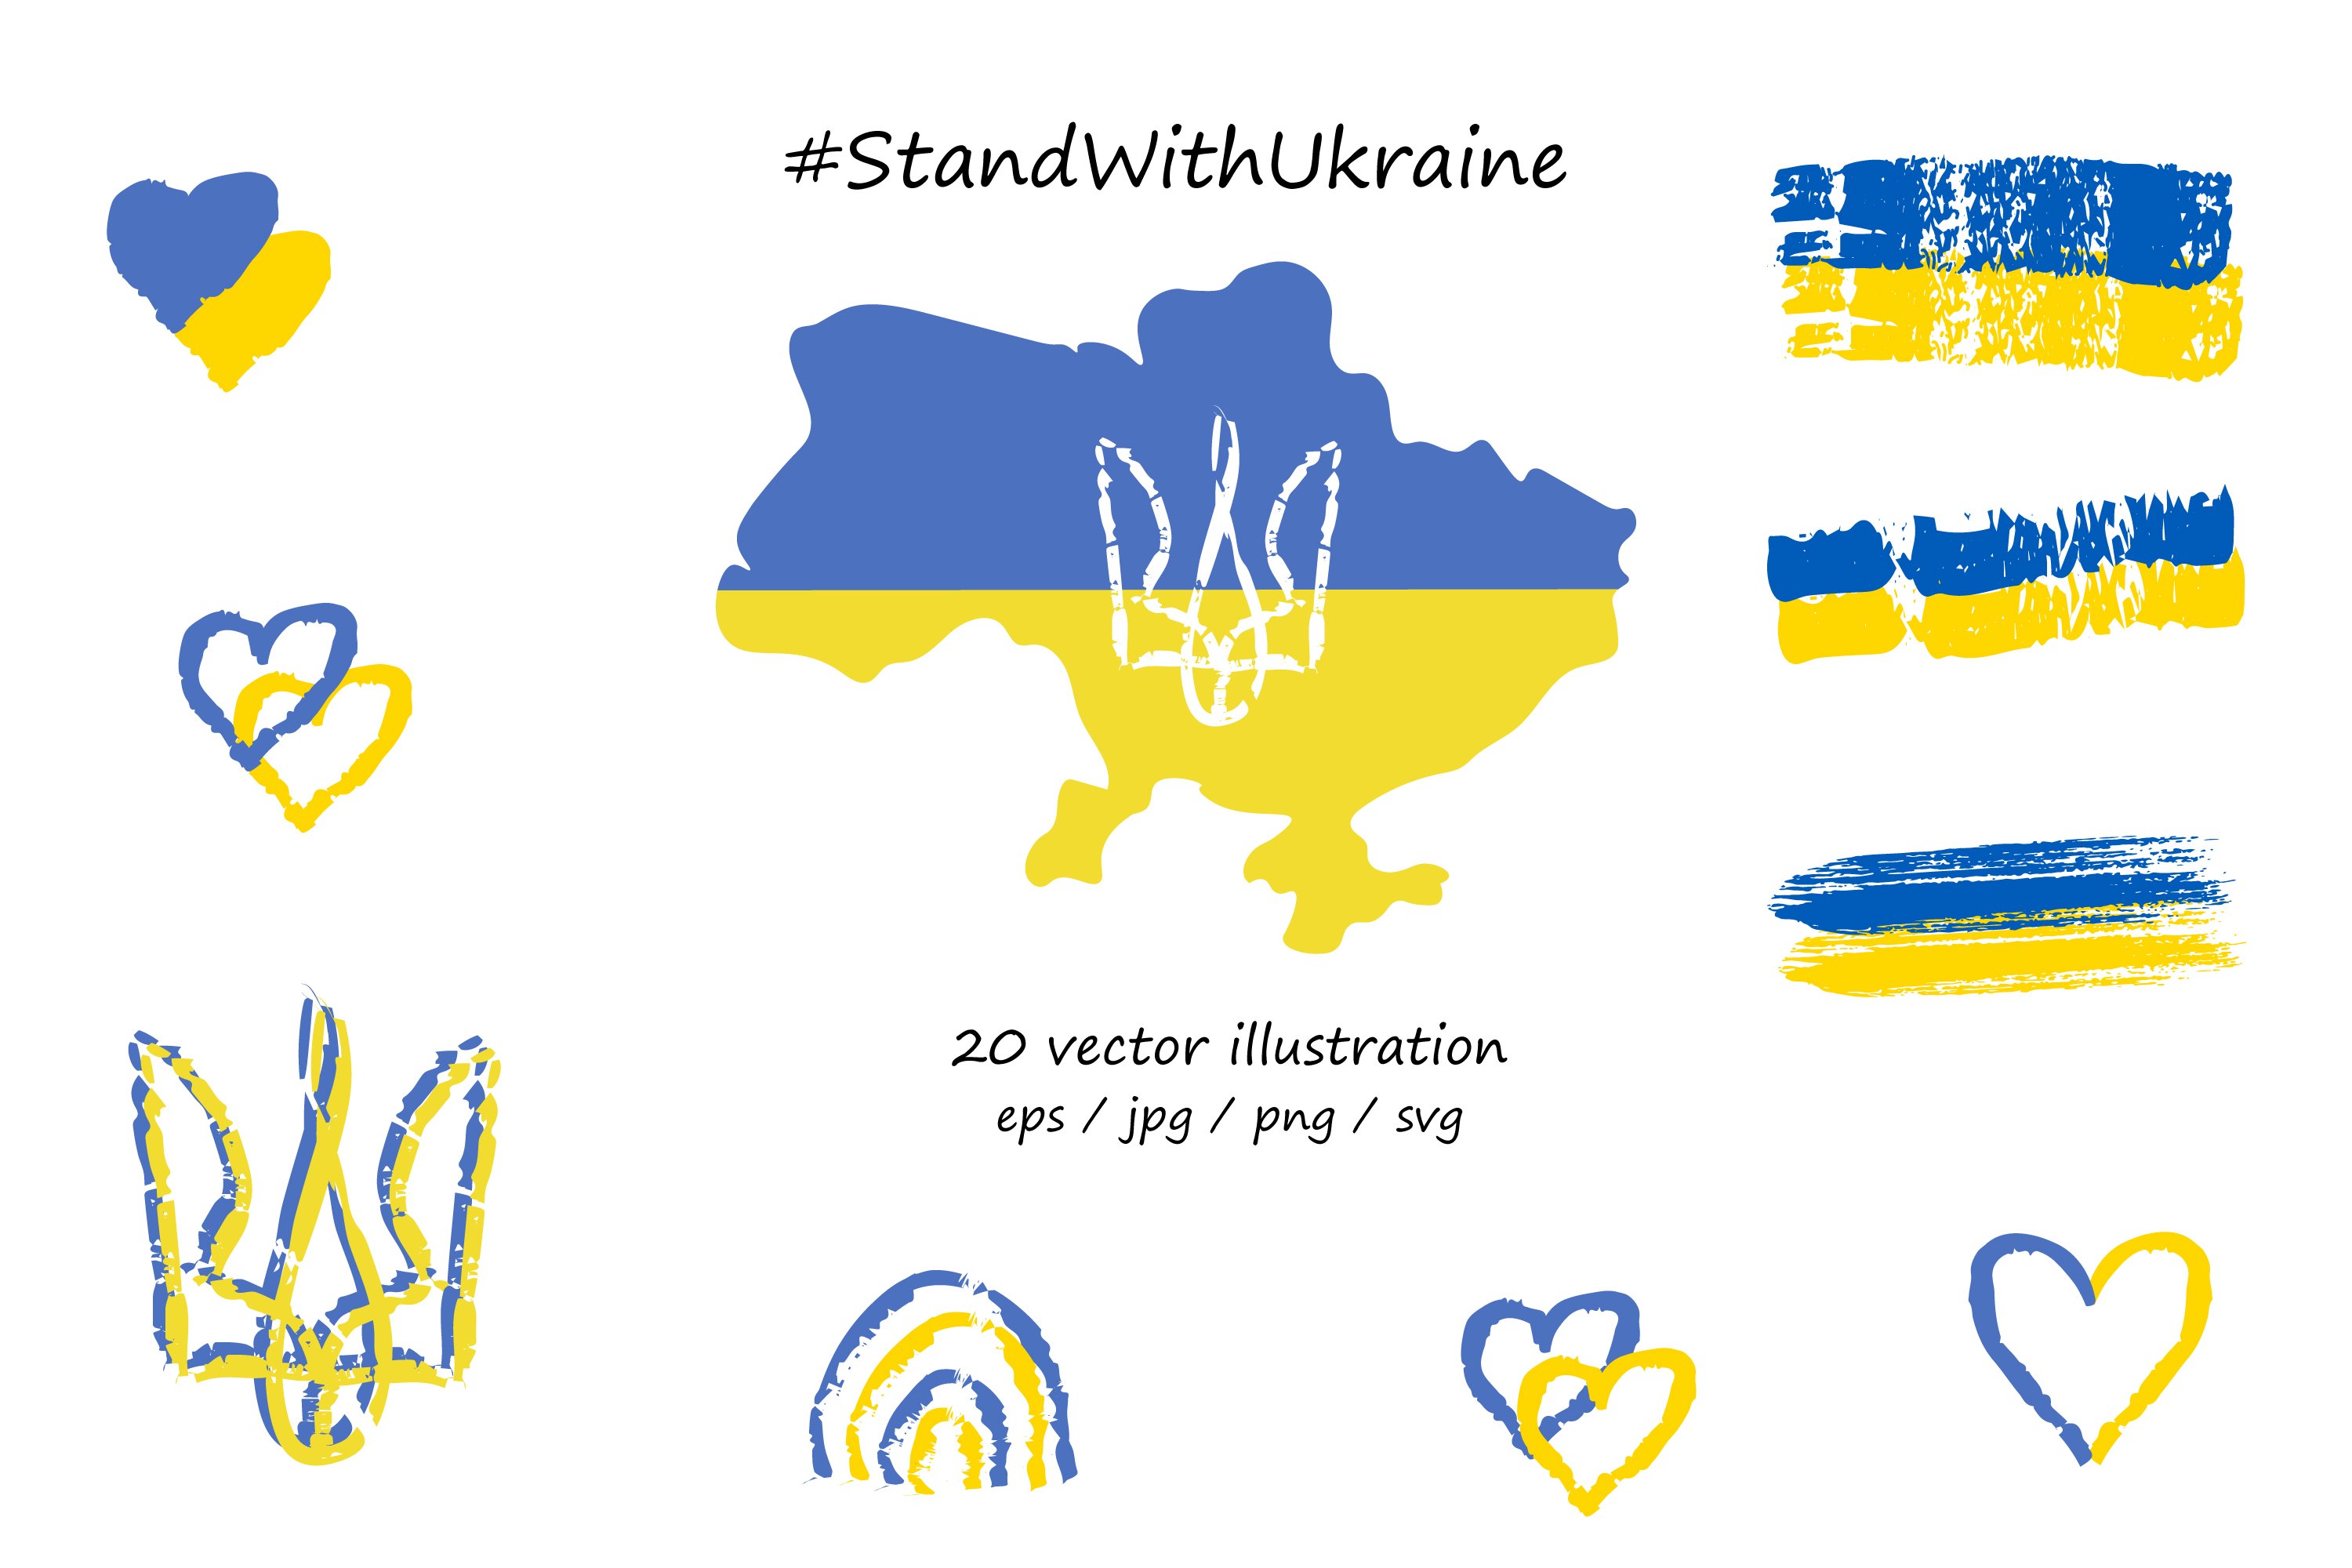 Stand with Ukraine cover image.